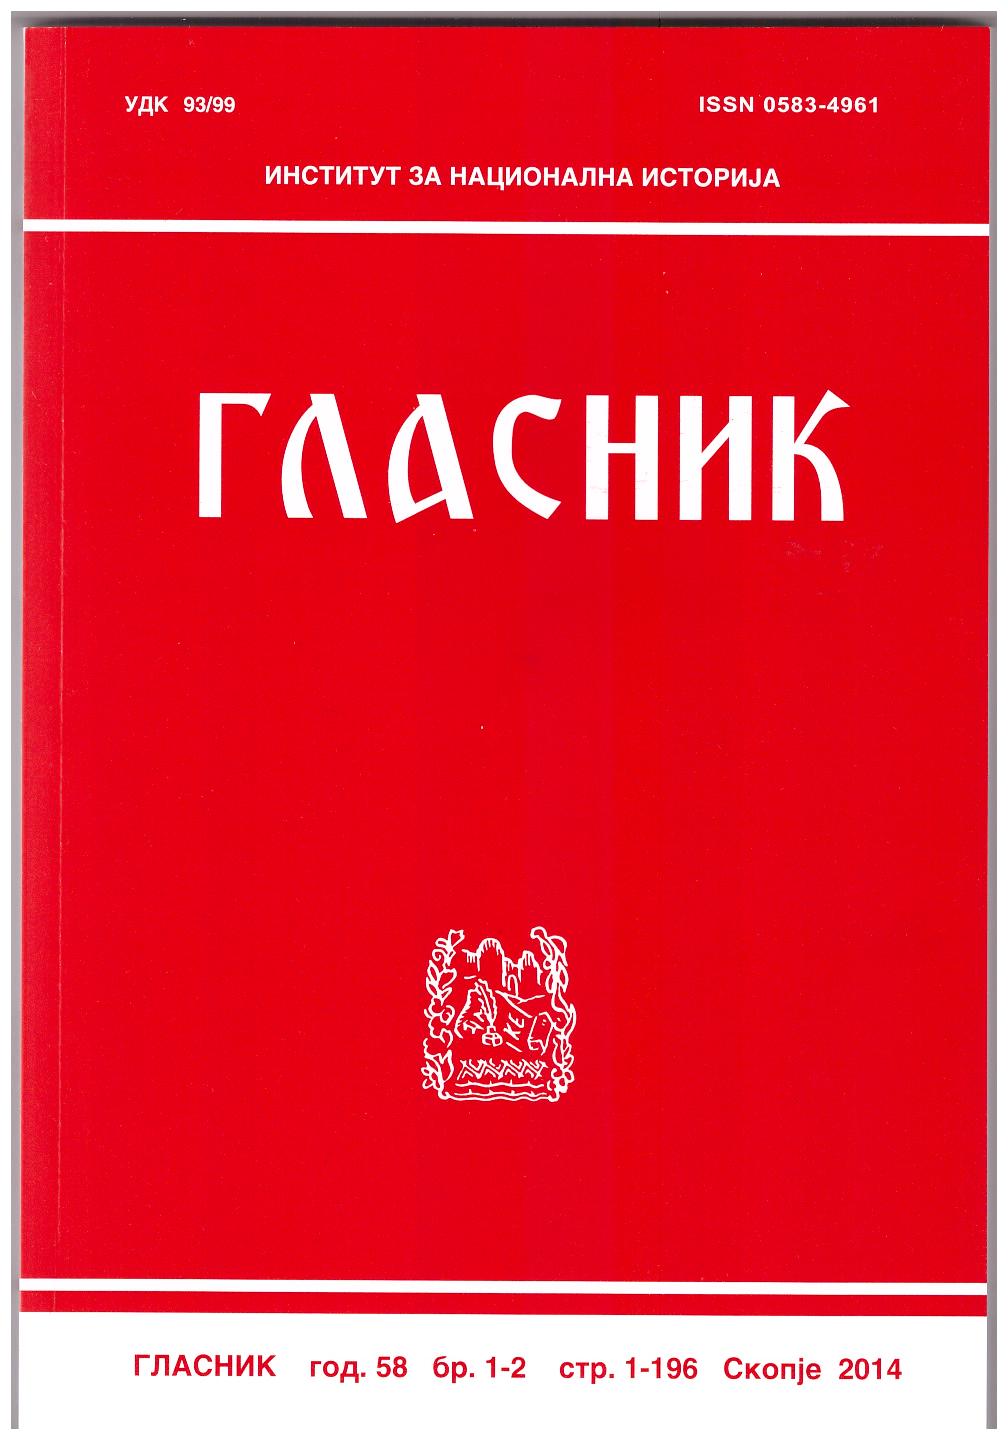 REVIEW OF VLADIMIR KARIC'S POLITICAL-PUBLIC PRODUCTION FOR THE BALKANS Cover Image